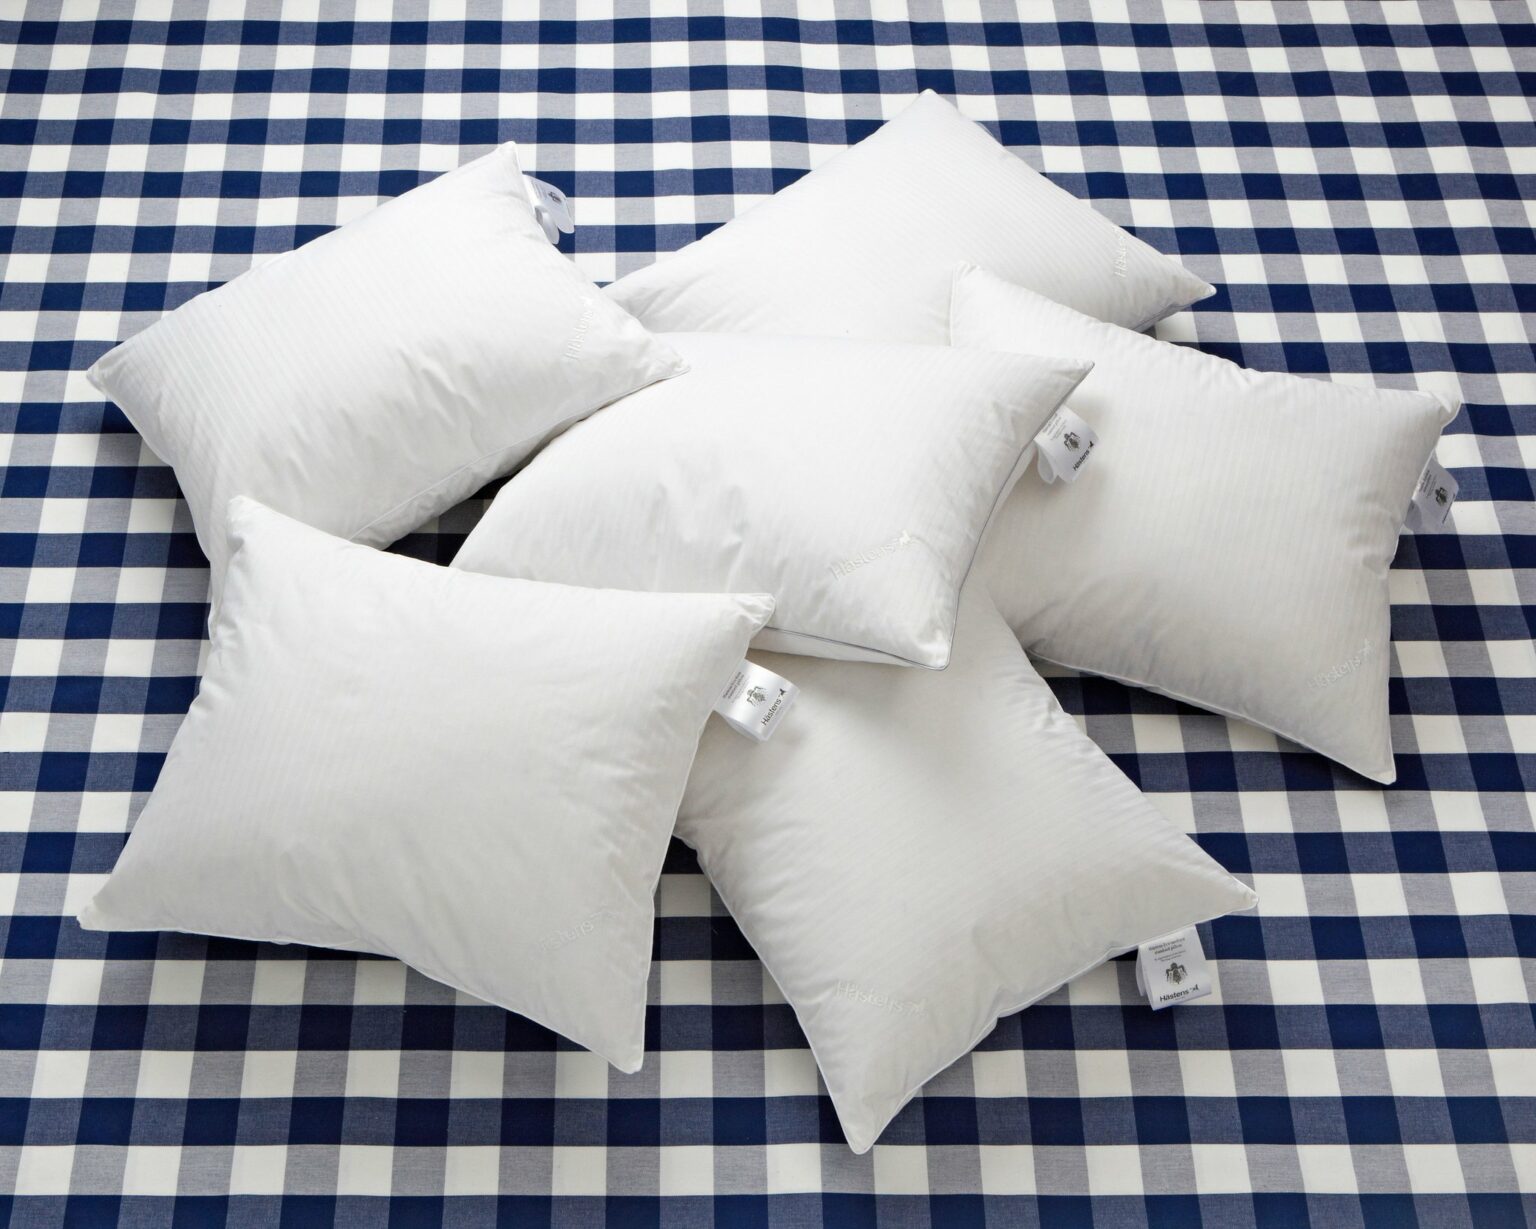 firm-pillow-high-scattered-on-original-blue-check-print_hastens